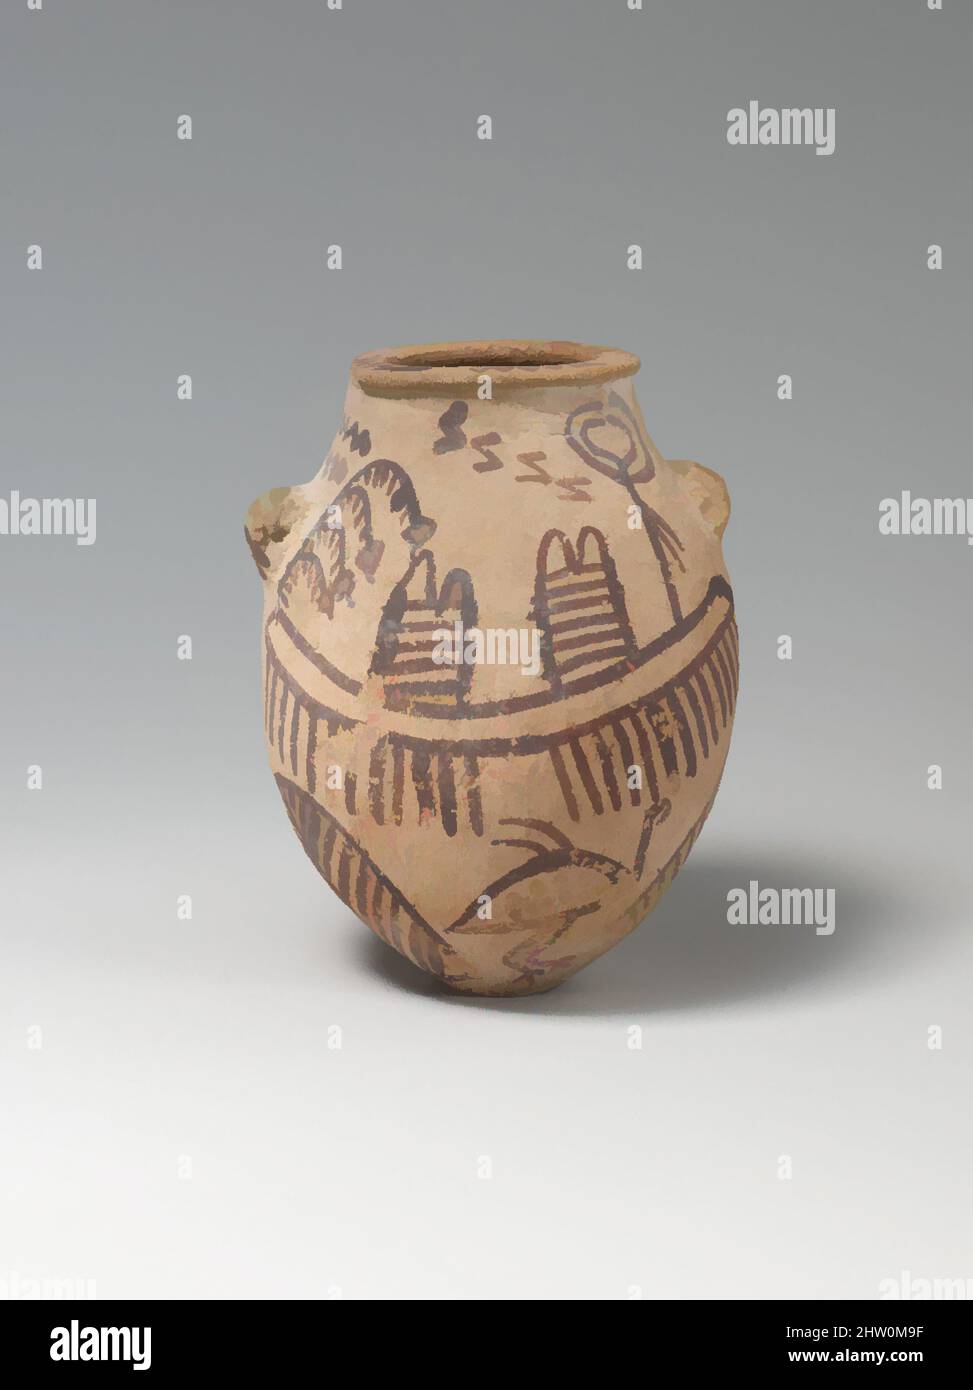 Art inspired by Jar Decorated with Boats, Naqada IIc–d1, ca. 3450–3350 B.C., From Egypt, Pottery, paint (Decorated Ware), H. 12.4 cm (4 7/8 in.); Diam. 4.2 cm (1 5/8 in, Classic works modernized by Artotop with a splash of modernity. Shapes, color and value, eye-catching visual impact on art. Emotions through freedom of artworks in a contemporary way. A timeless message pursuing a wildly creative new direction. Artists turning to the digital medium and creating the Artotop NFT Stock Photo